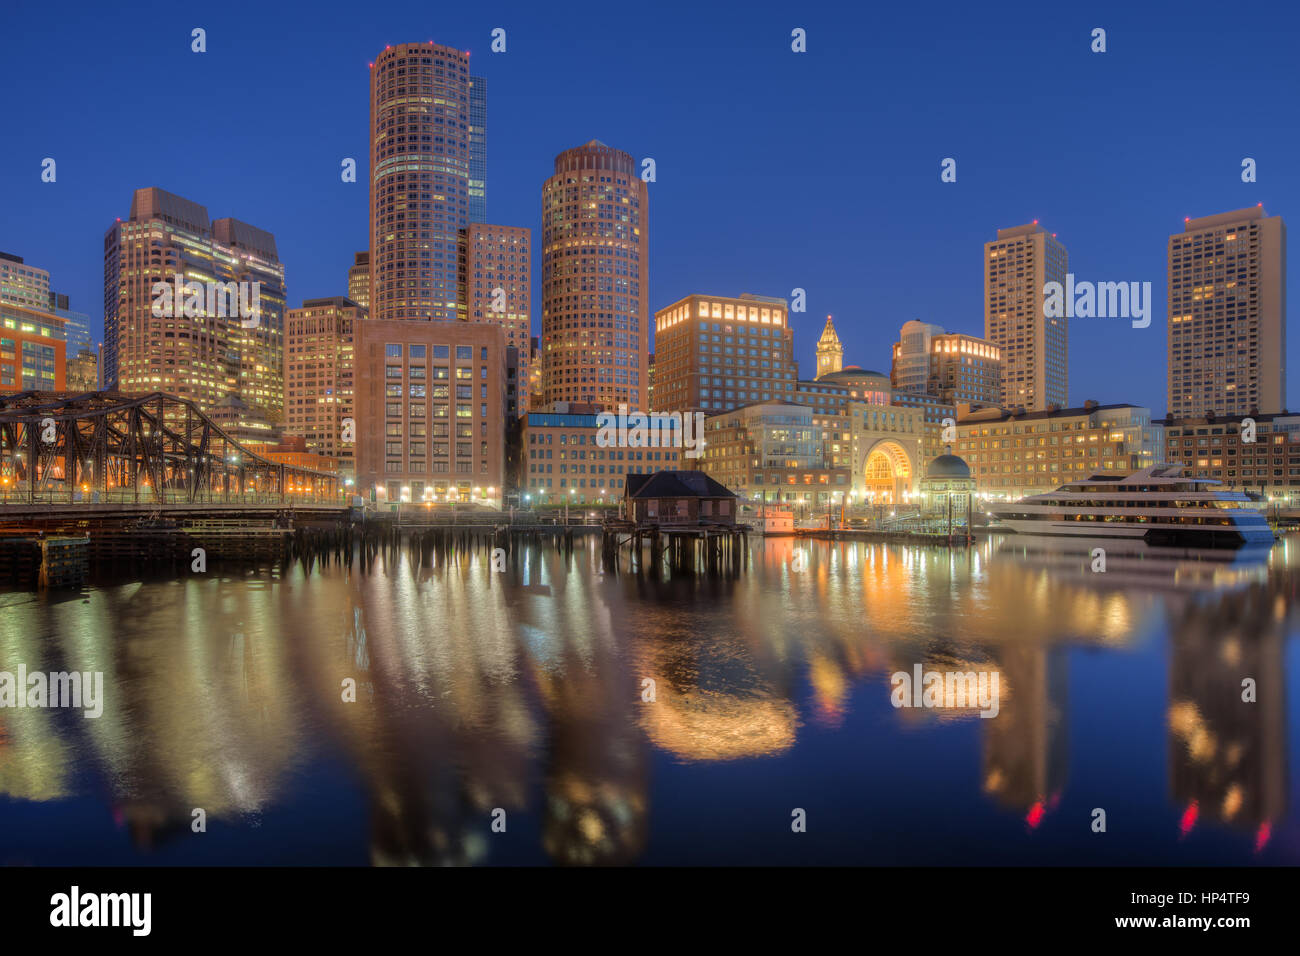 The skyline reflects off the still waters of the harbor in the last hour before sunrise as a new day begins in Boston, Massachusetts. Stock Photo